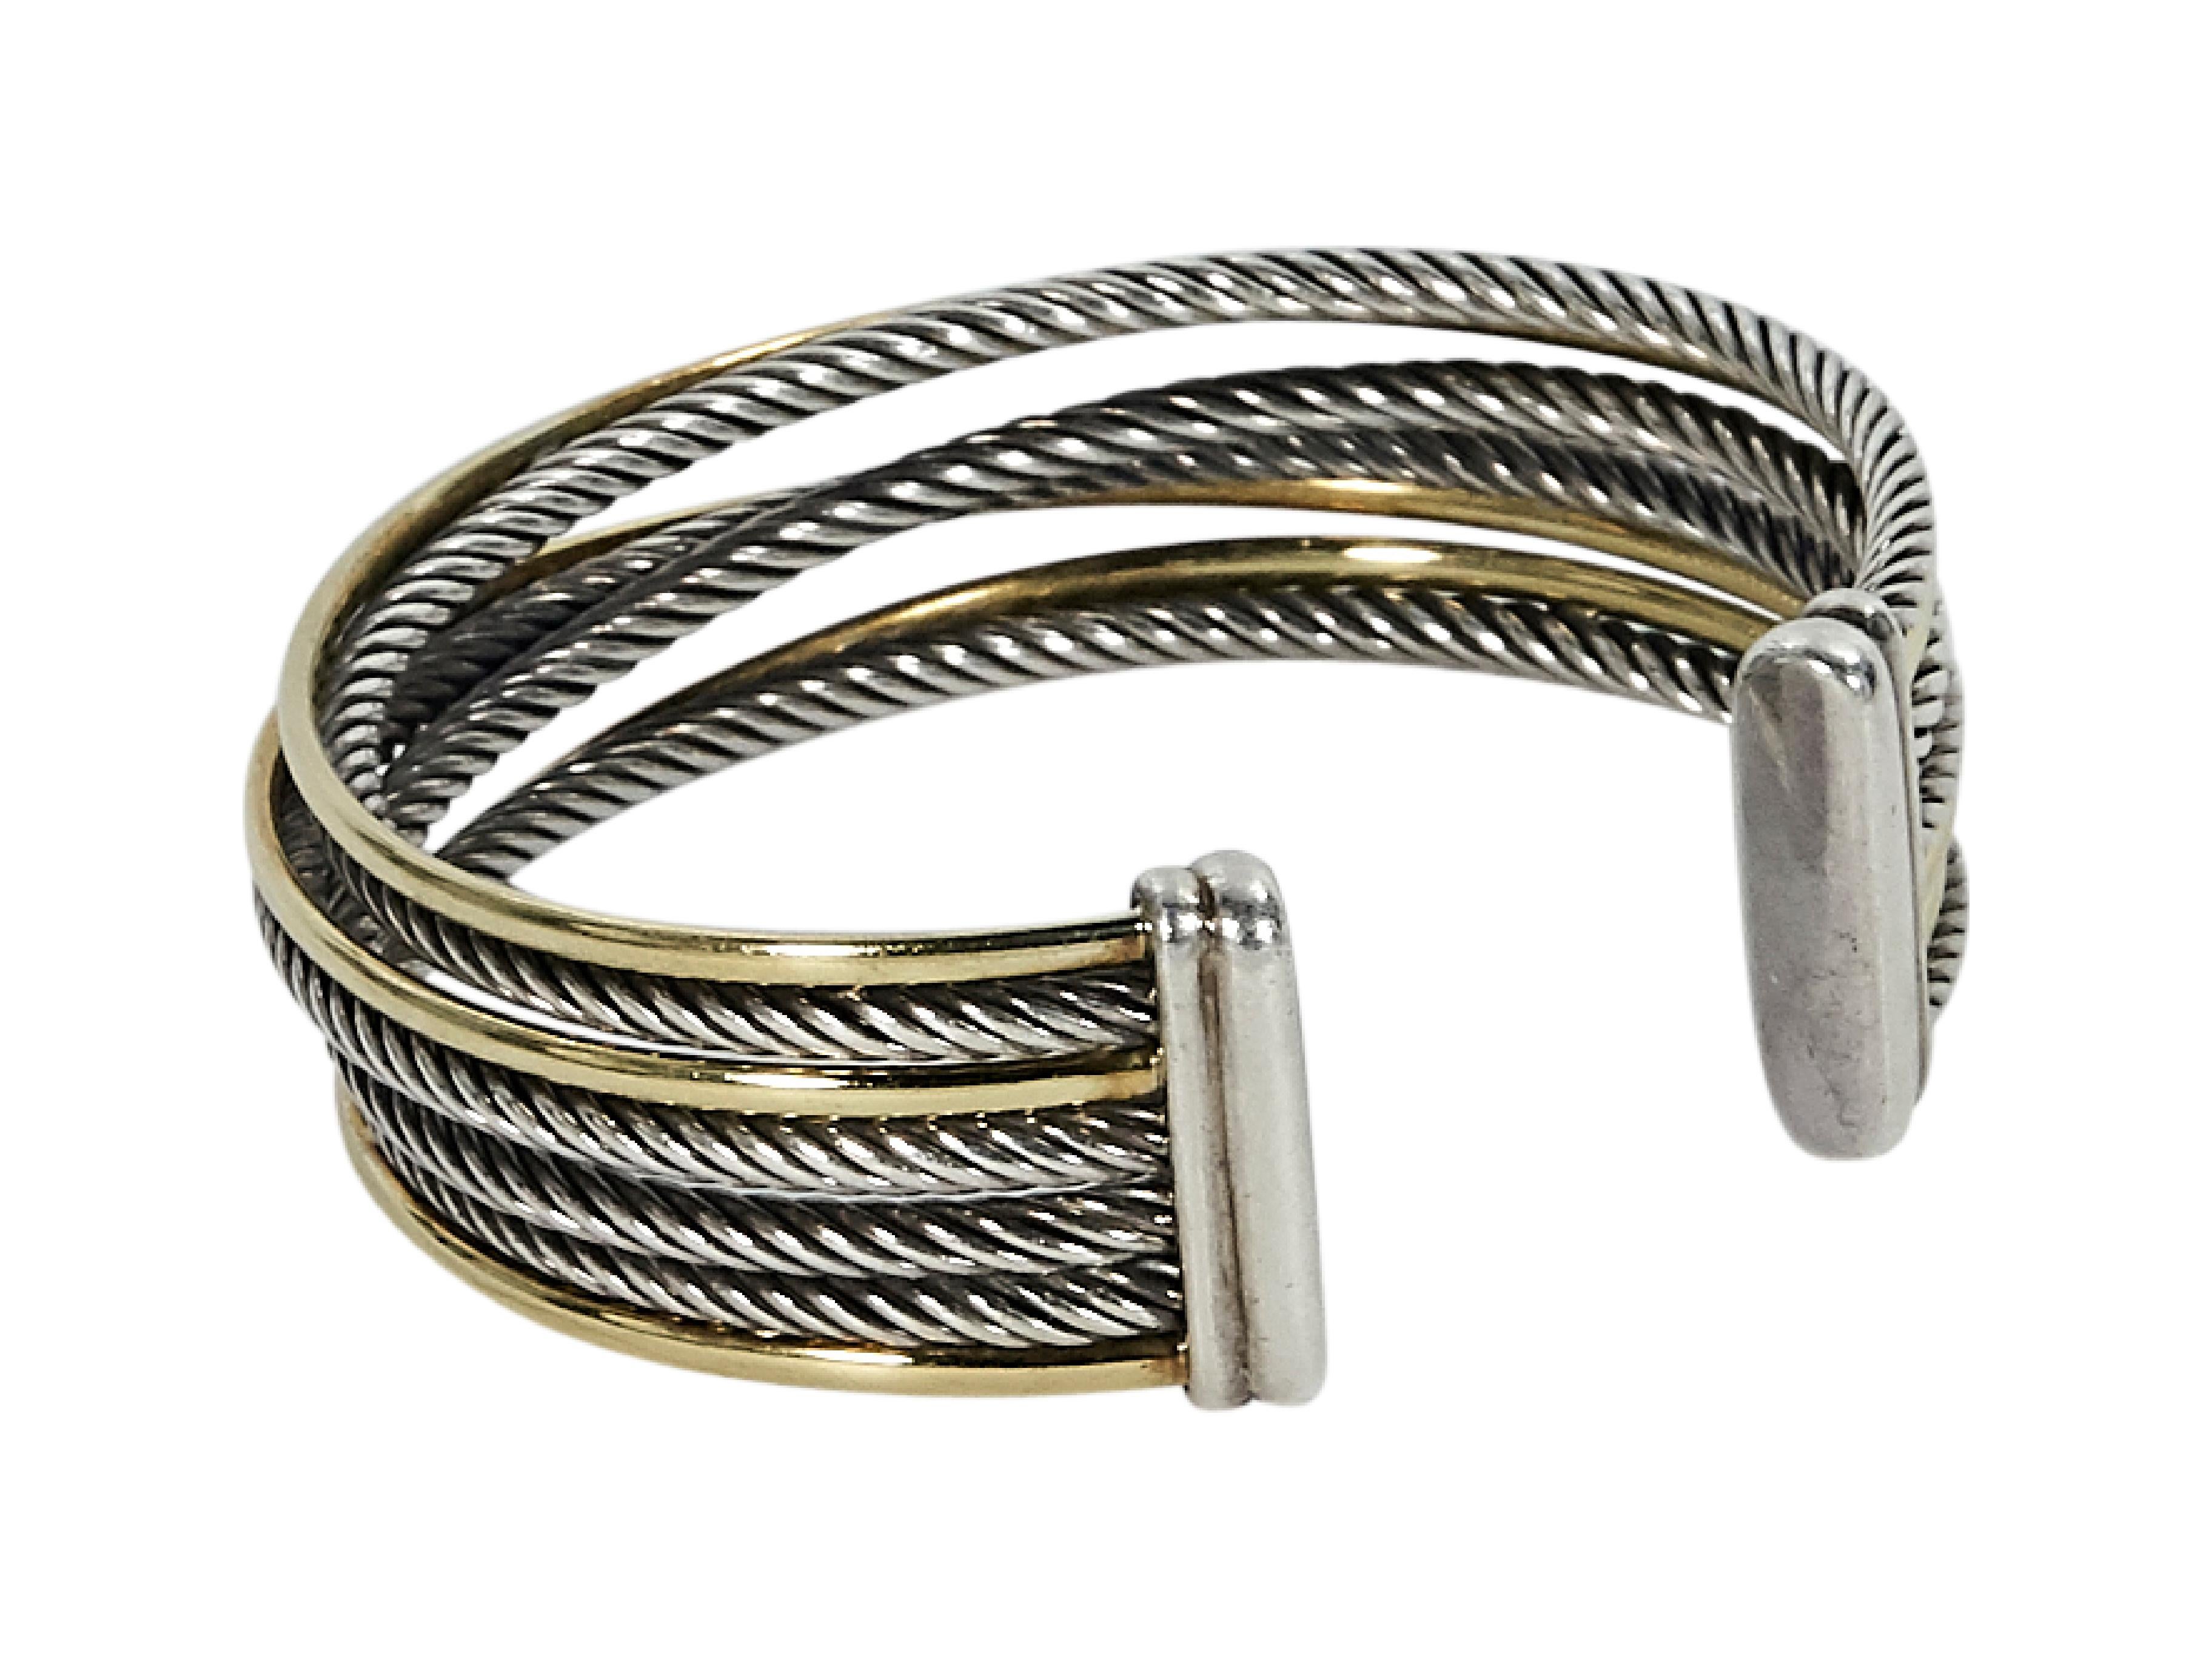 Product details:  18K yellow gold and stainless steel Crossover cuff bracelet by David Yurman.  Four-row design.  Original box included.  8